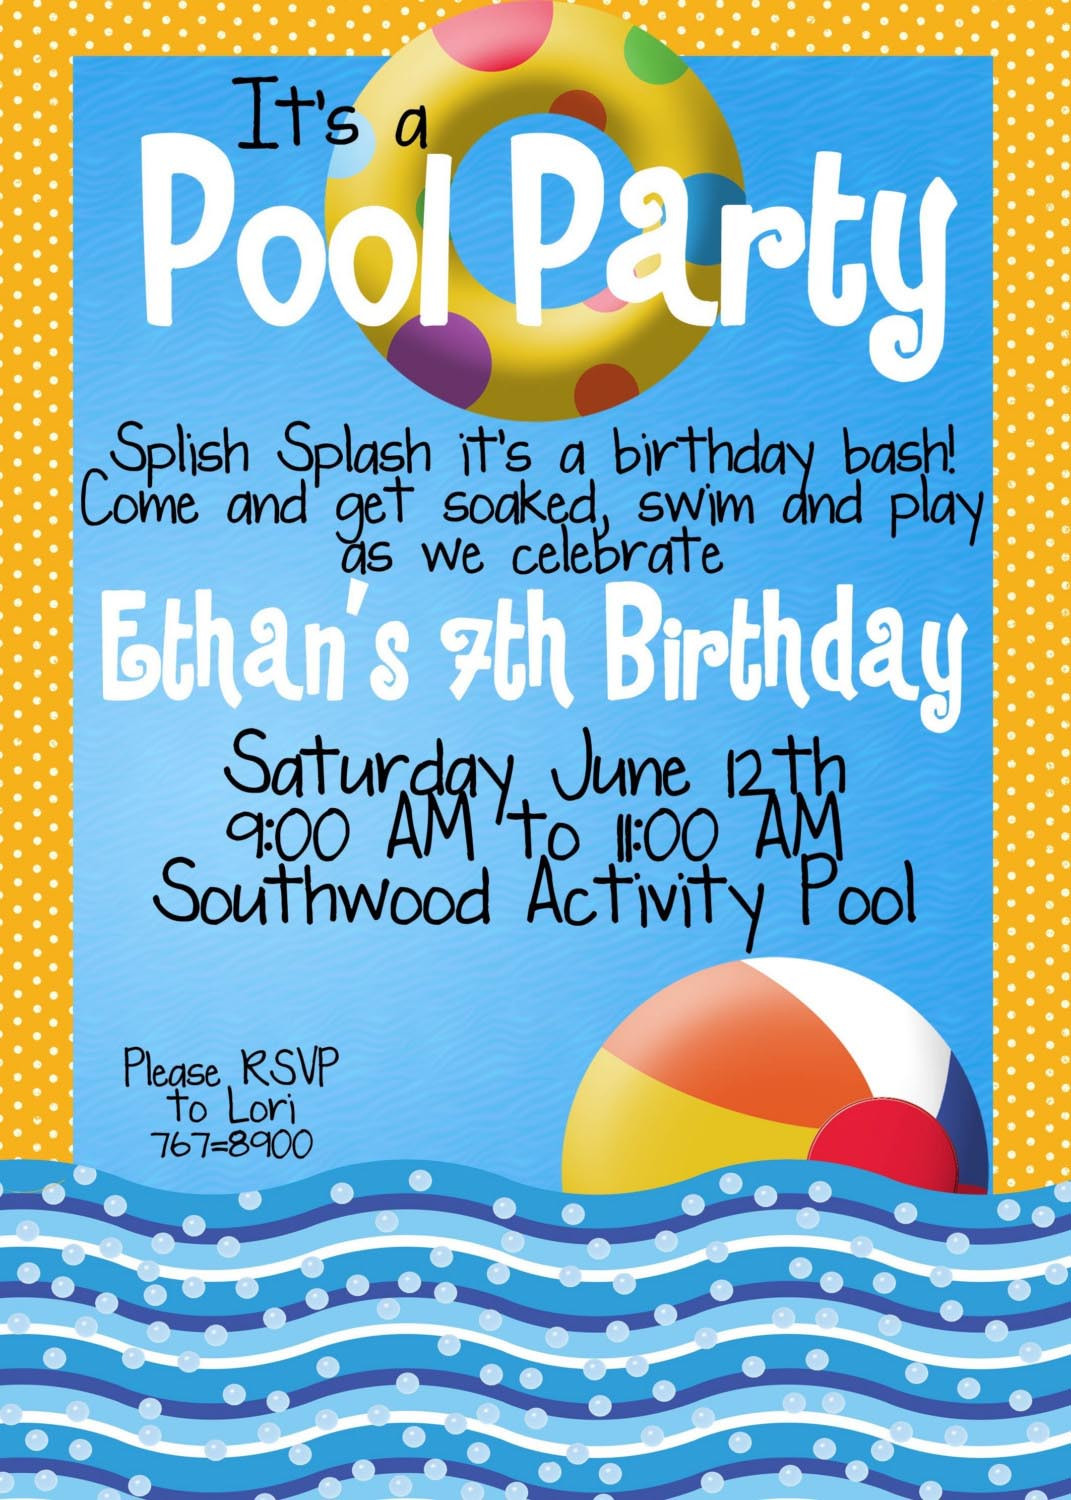 Pool Party Invitation Wording Ideas
 The Perfect Kids Pool Party